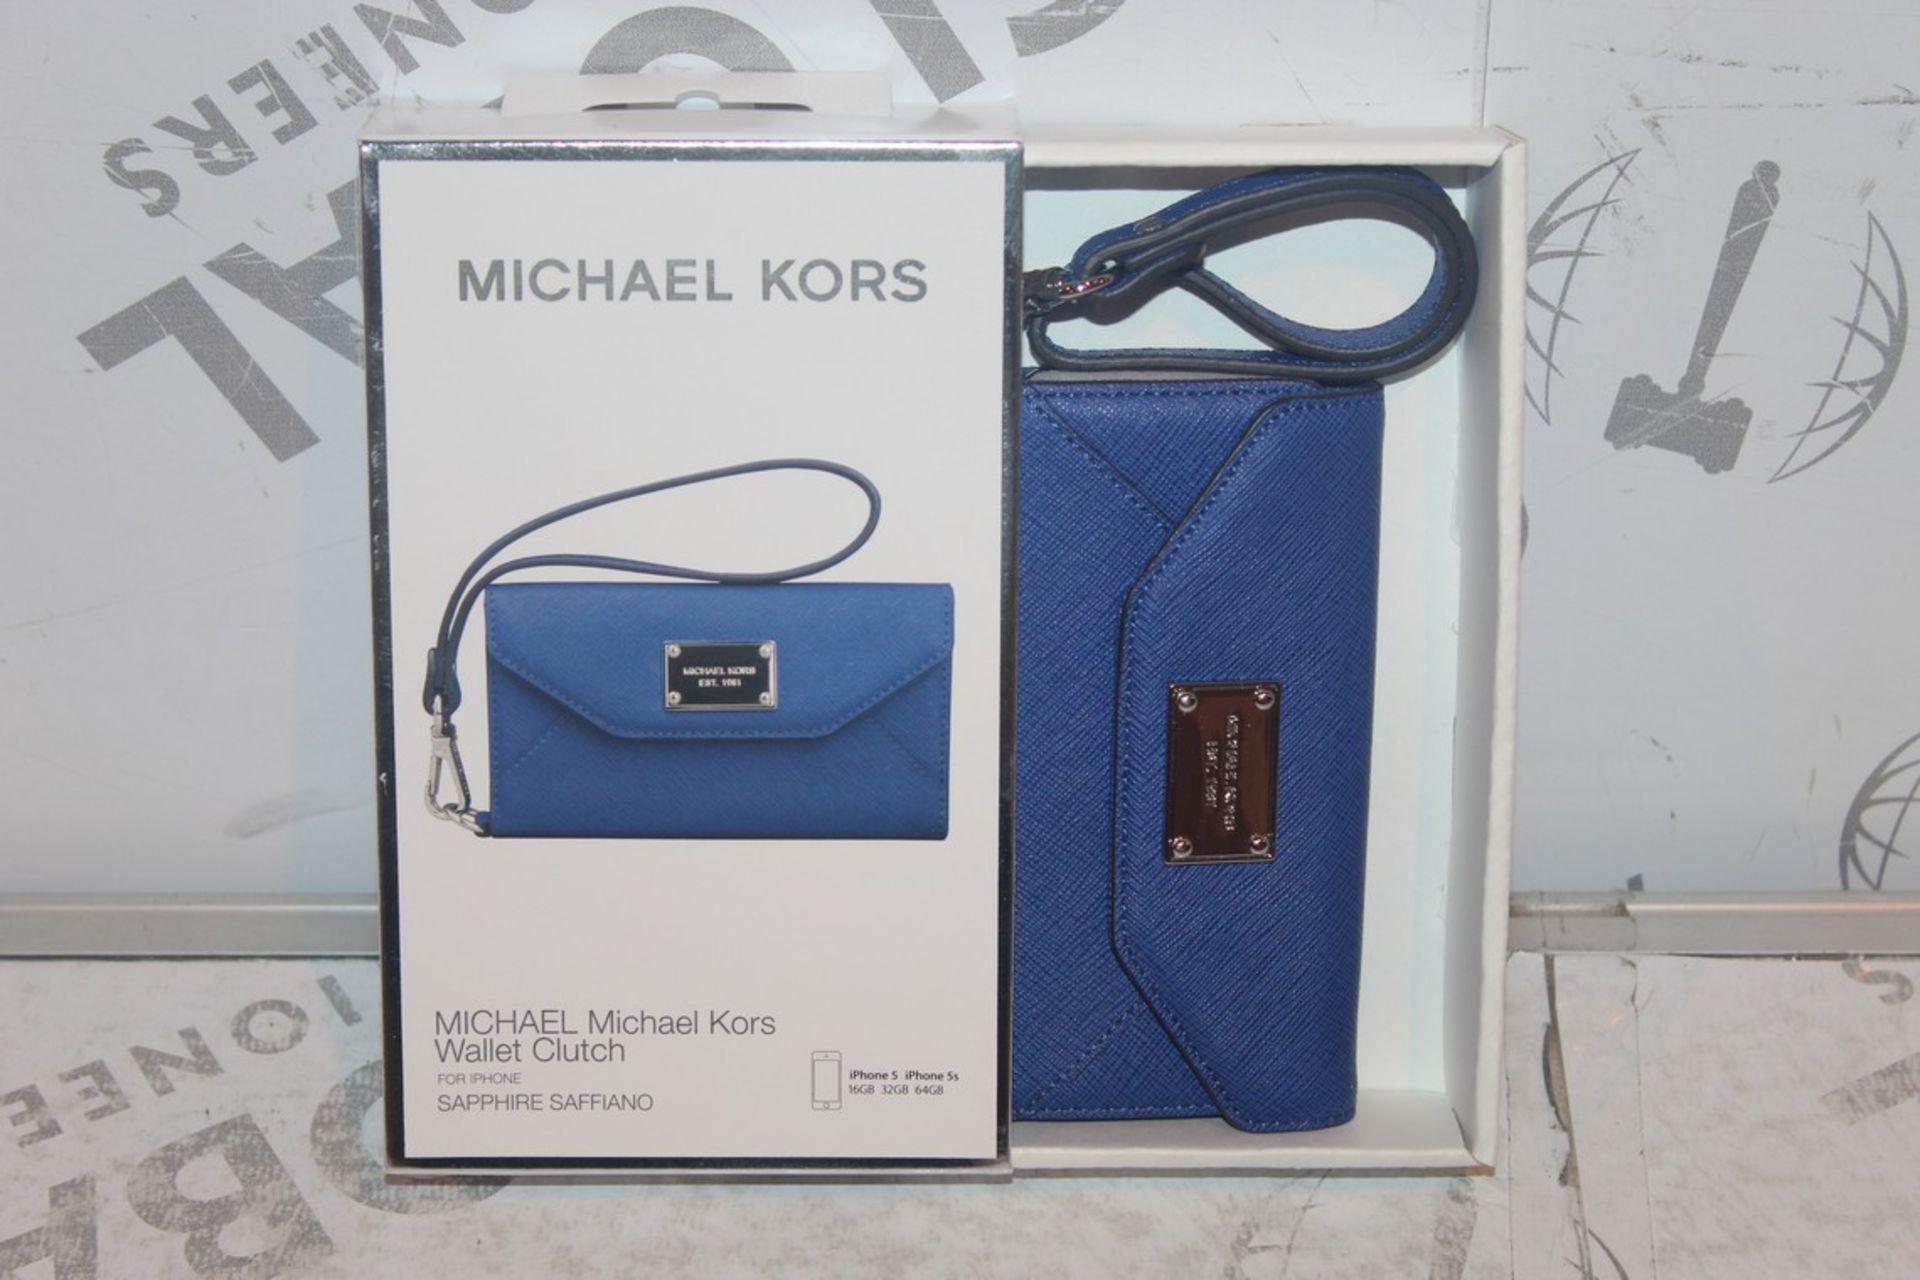 Lot to Contain 10 Boxed Brand New Michael Kors Sap